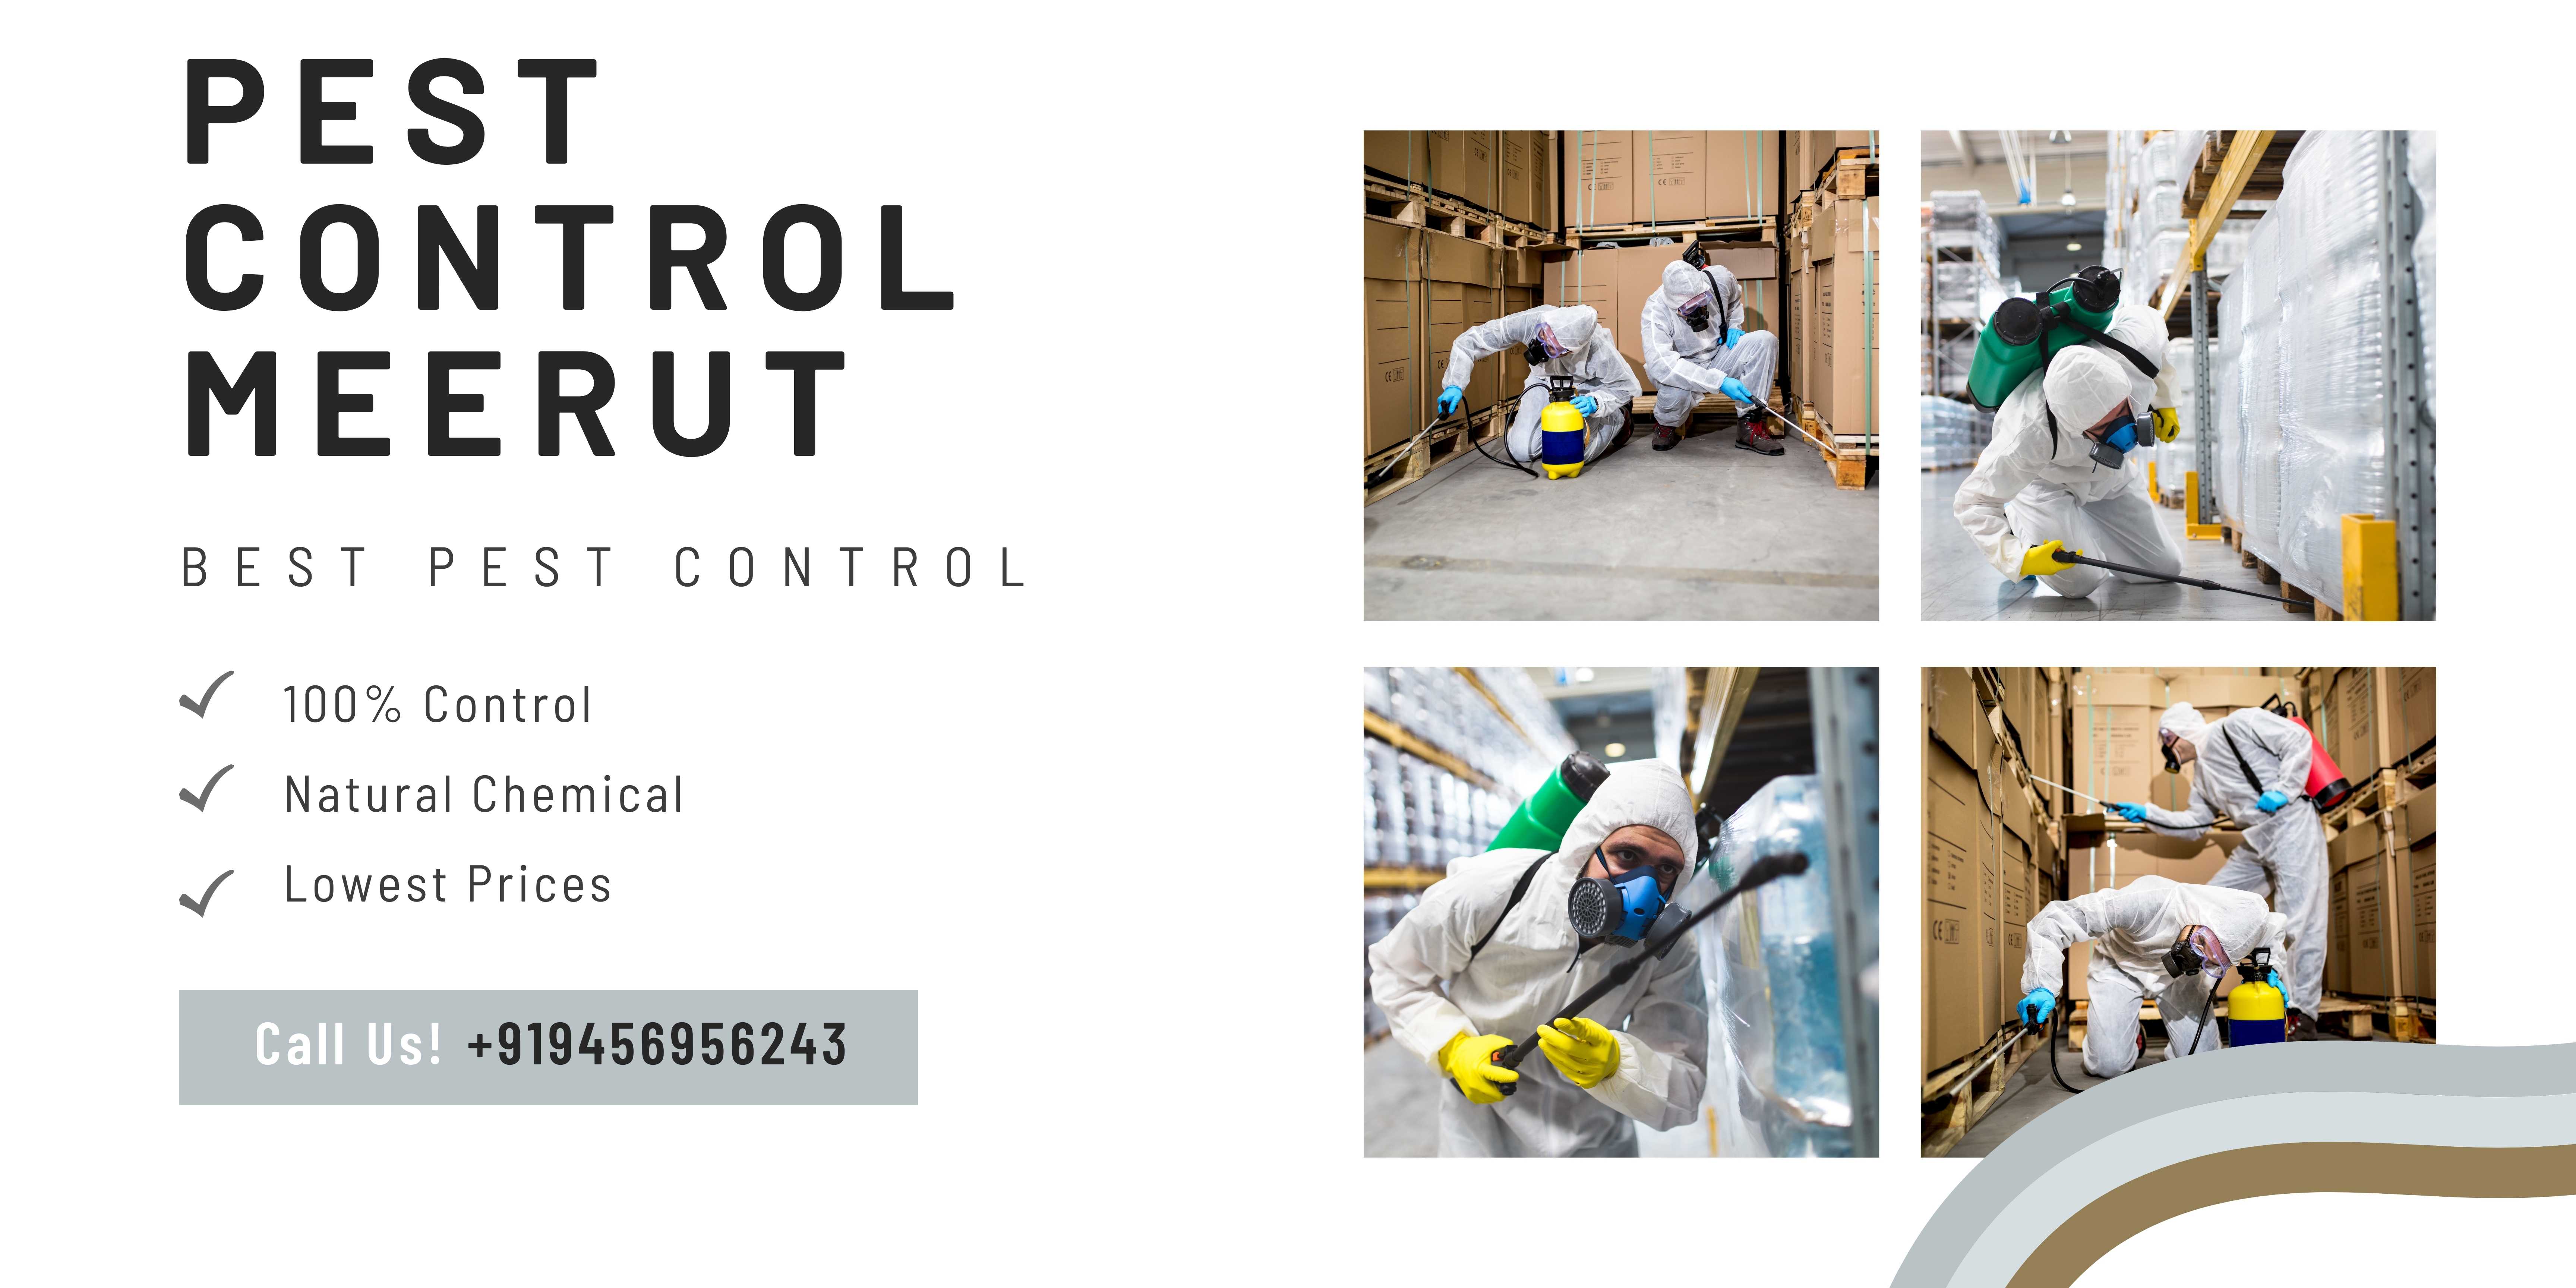 We deliver the best pest control services across Meerut, with expert technical advice and professional solutions.